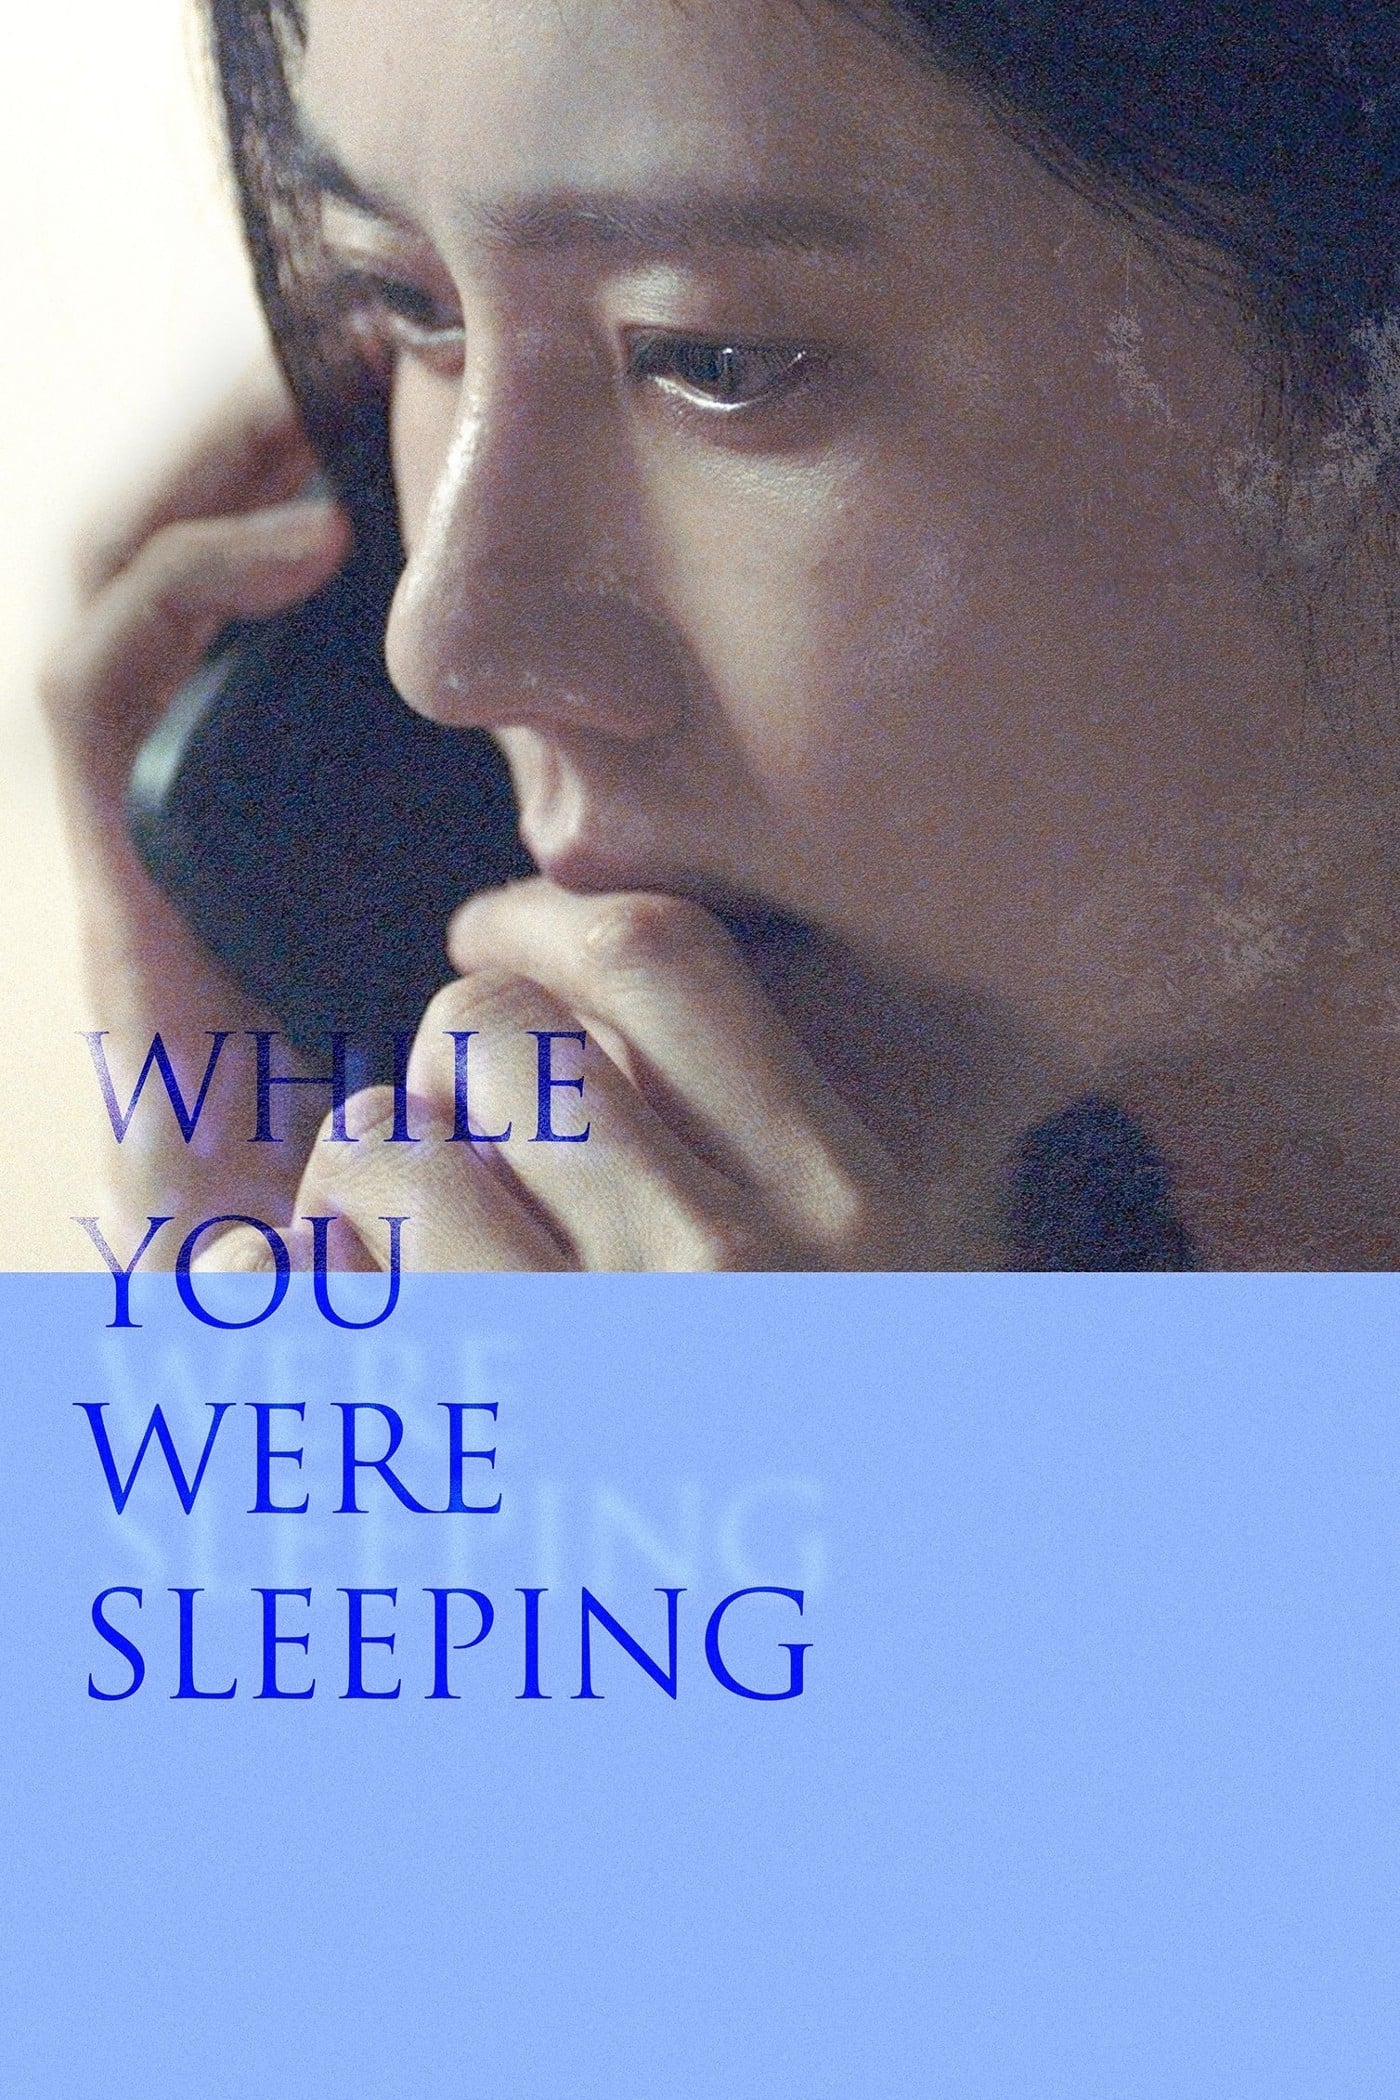 While You Were Sleeping